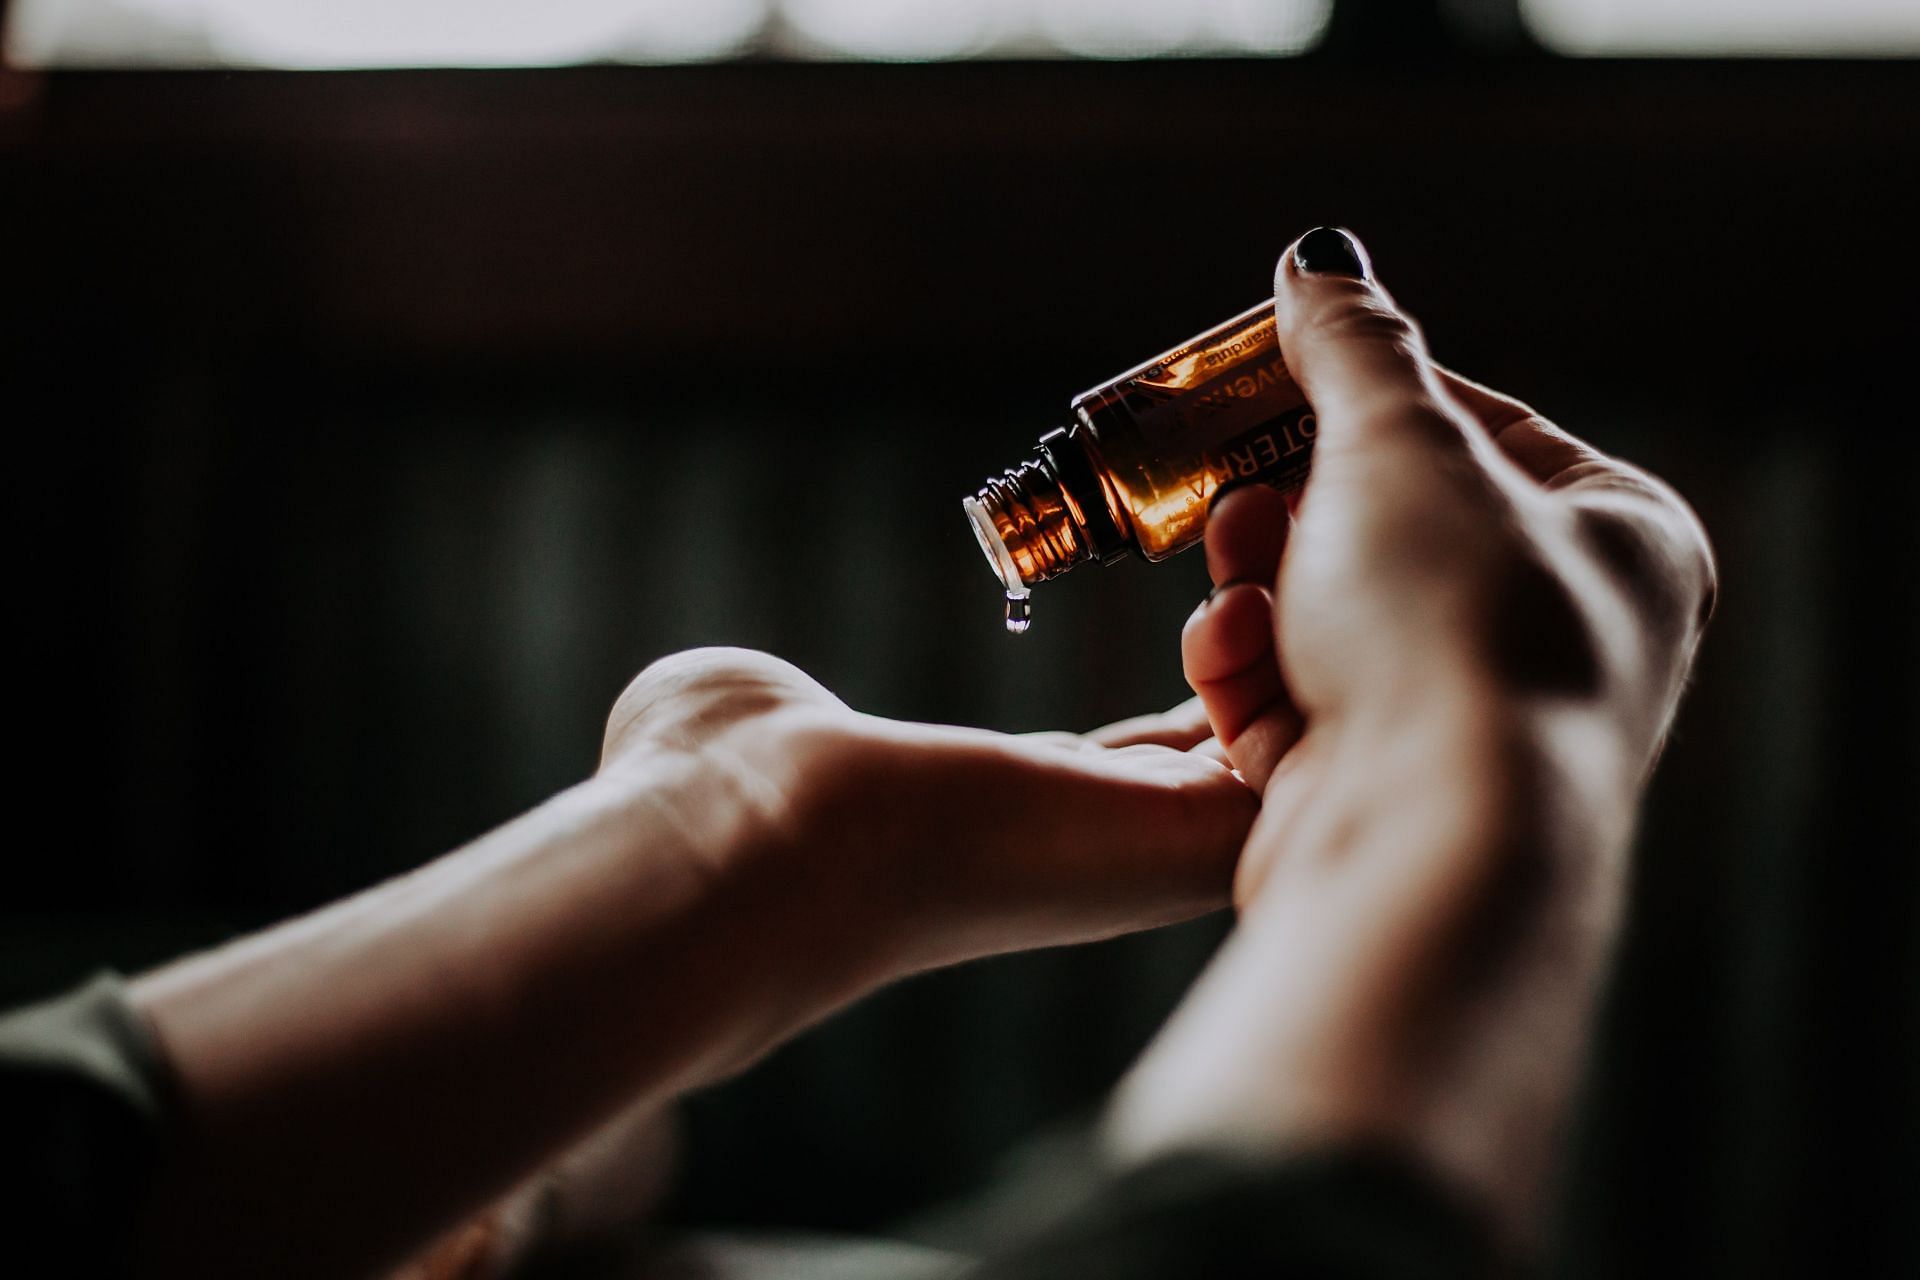 Tea tree oil can reduce inflammation and acne scars. (Image via Unsplash/Christin Hume)